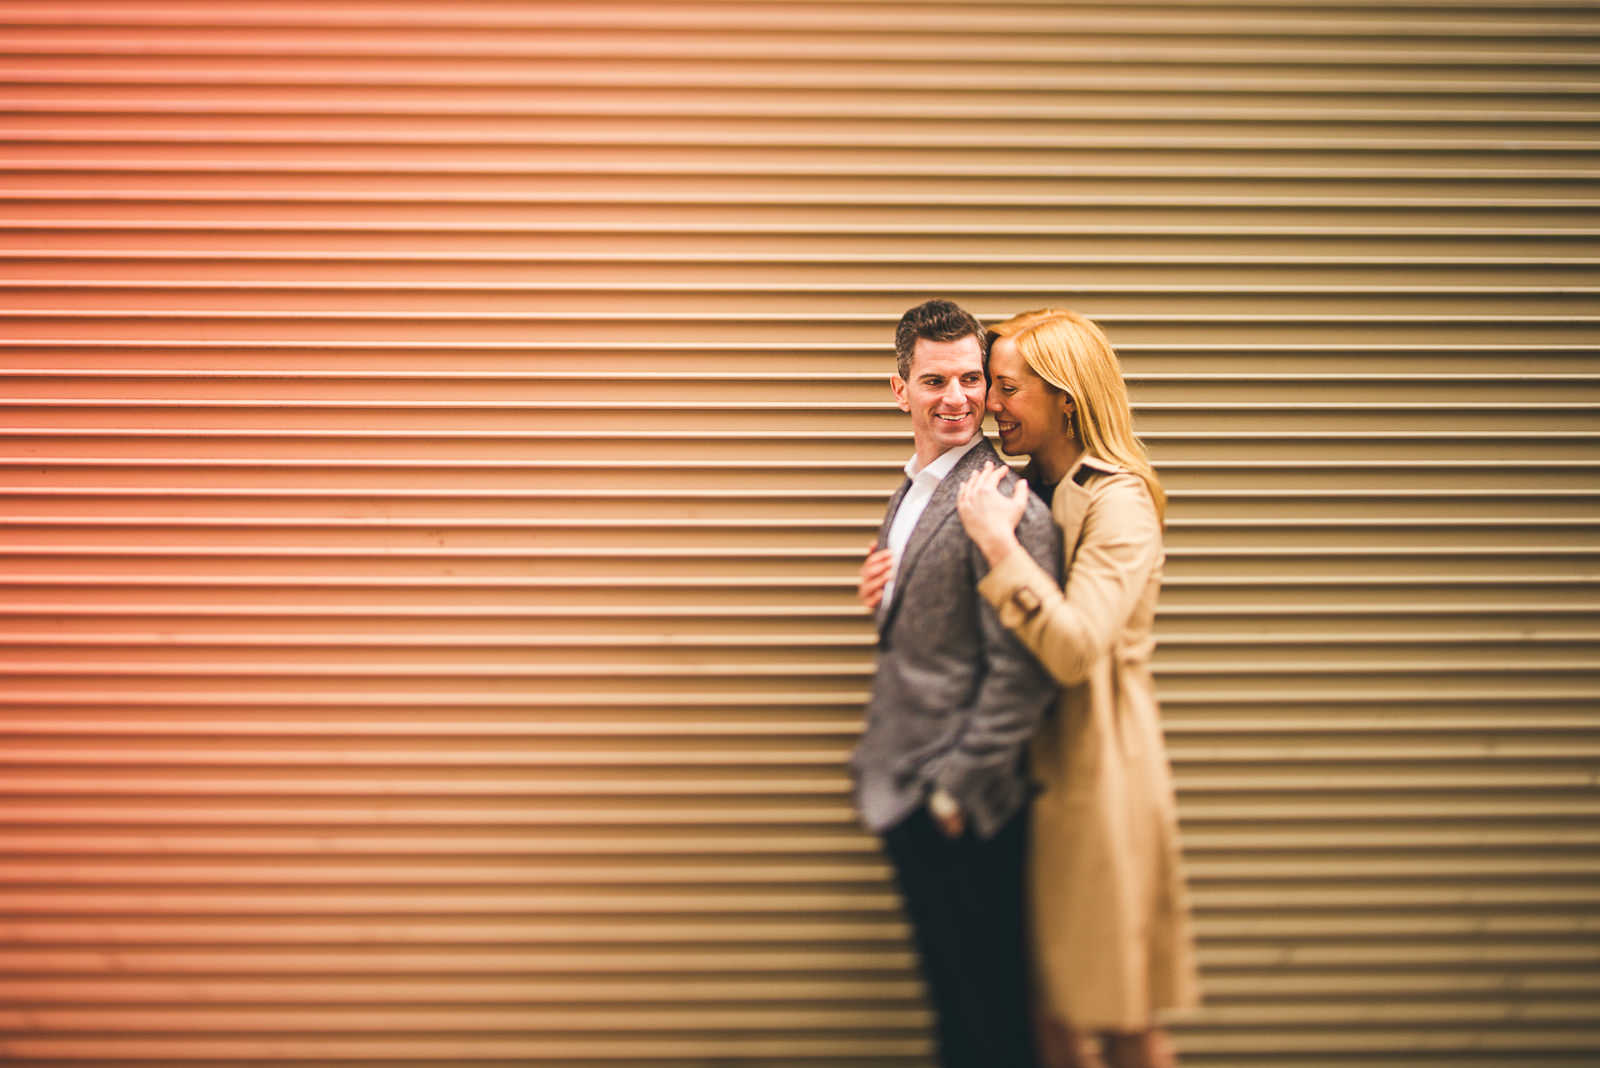 07 fun engagement photo ideas in chicago - Megan + Bob // Chicago River North Engagement Session at Shaws Crab House